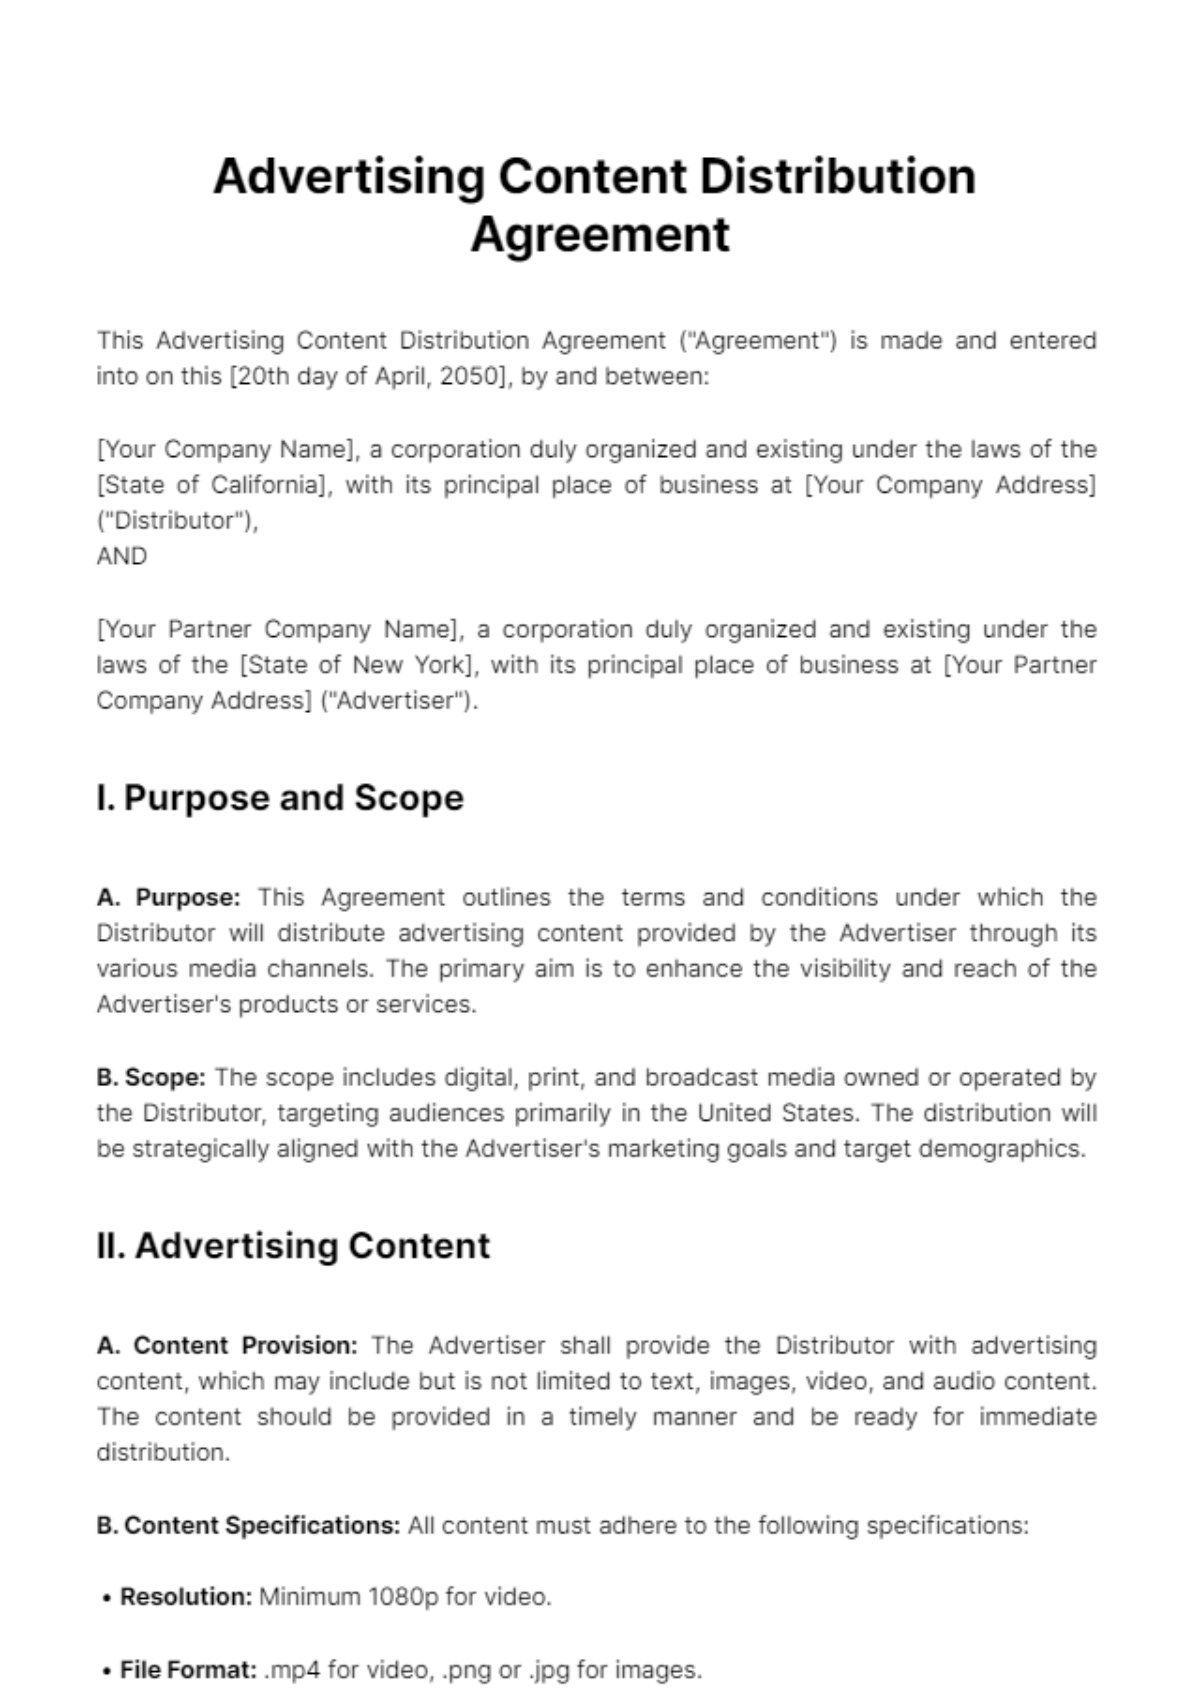 Advertising Content Distribution Agreement Template